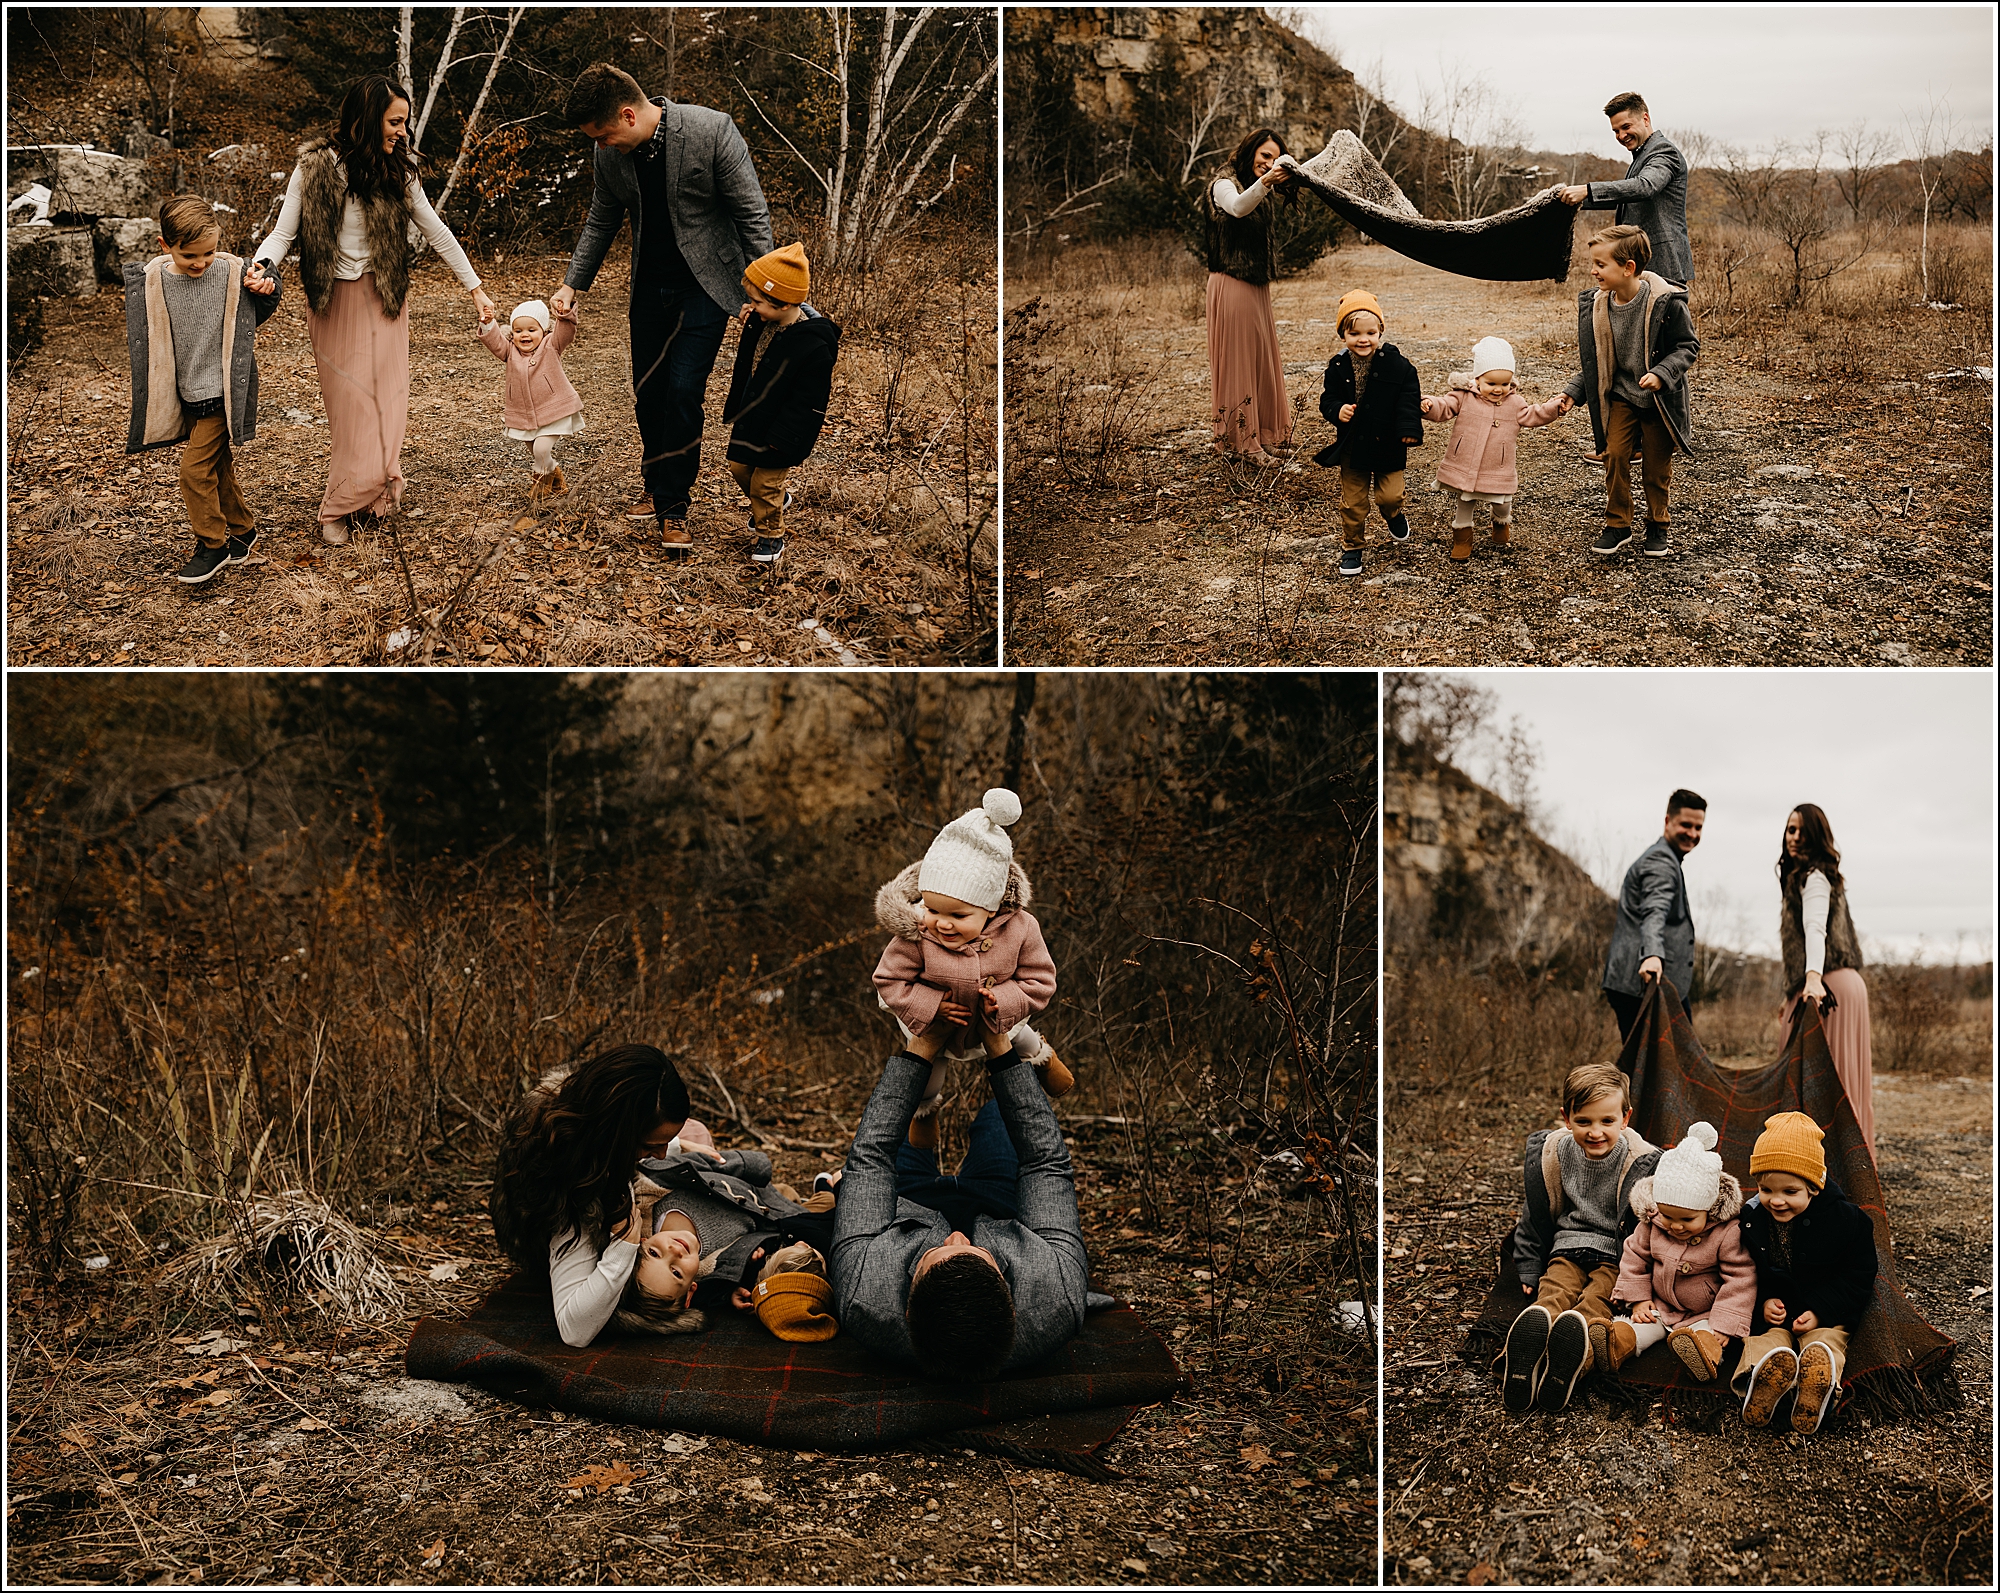 fun family portraits pictures where a young family is playing games like throwing up a blanket for the kids to run under, the parents swinging a child, dad holding baby up, and the parents pulling the kids on a blanket